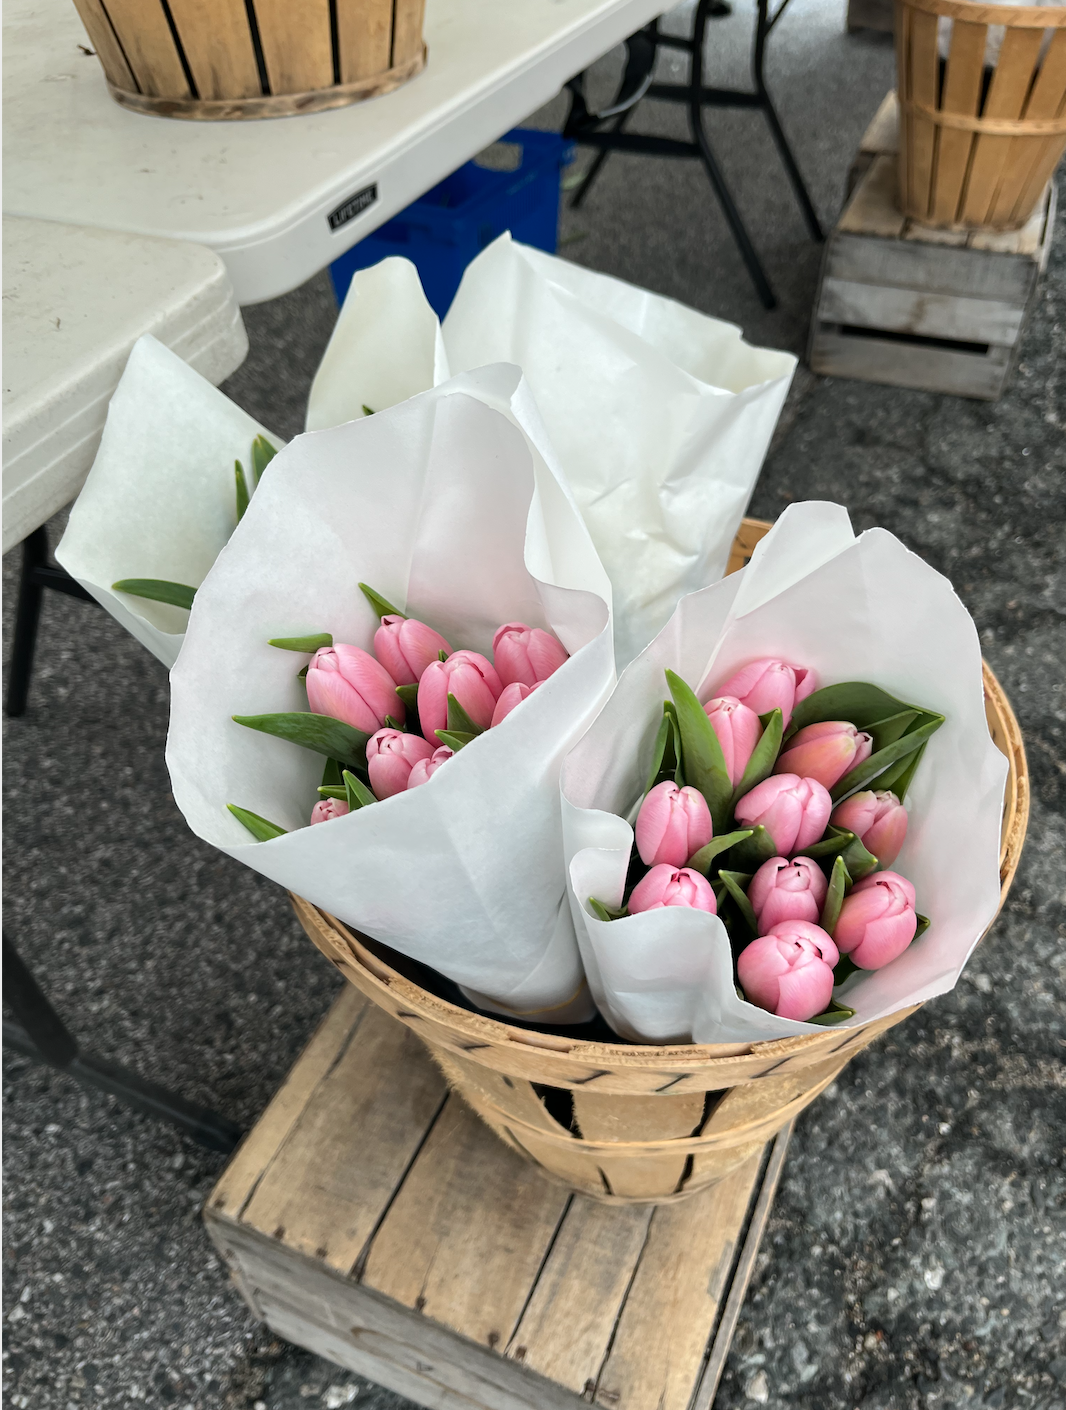 Pink tulips in several bouquets with white paper wrapping